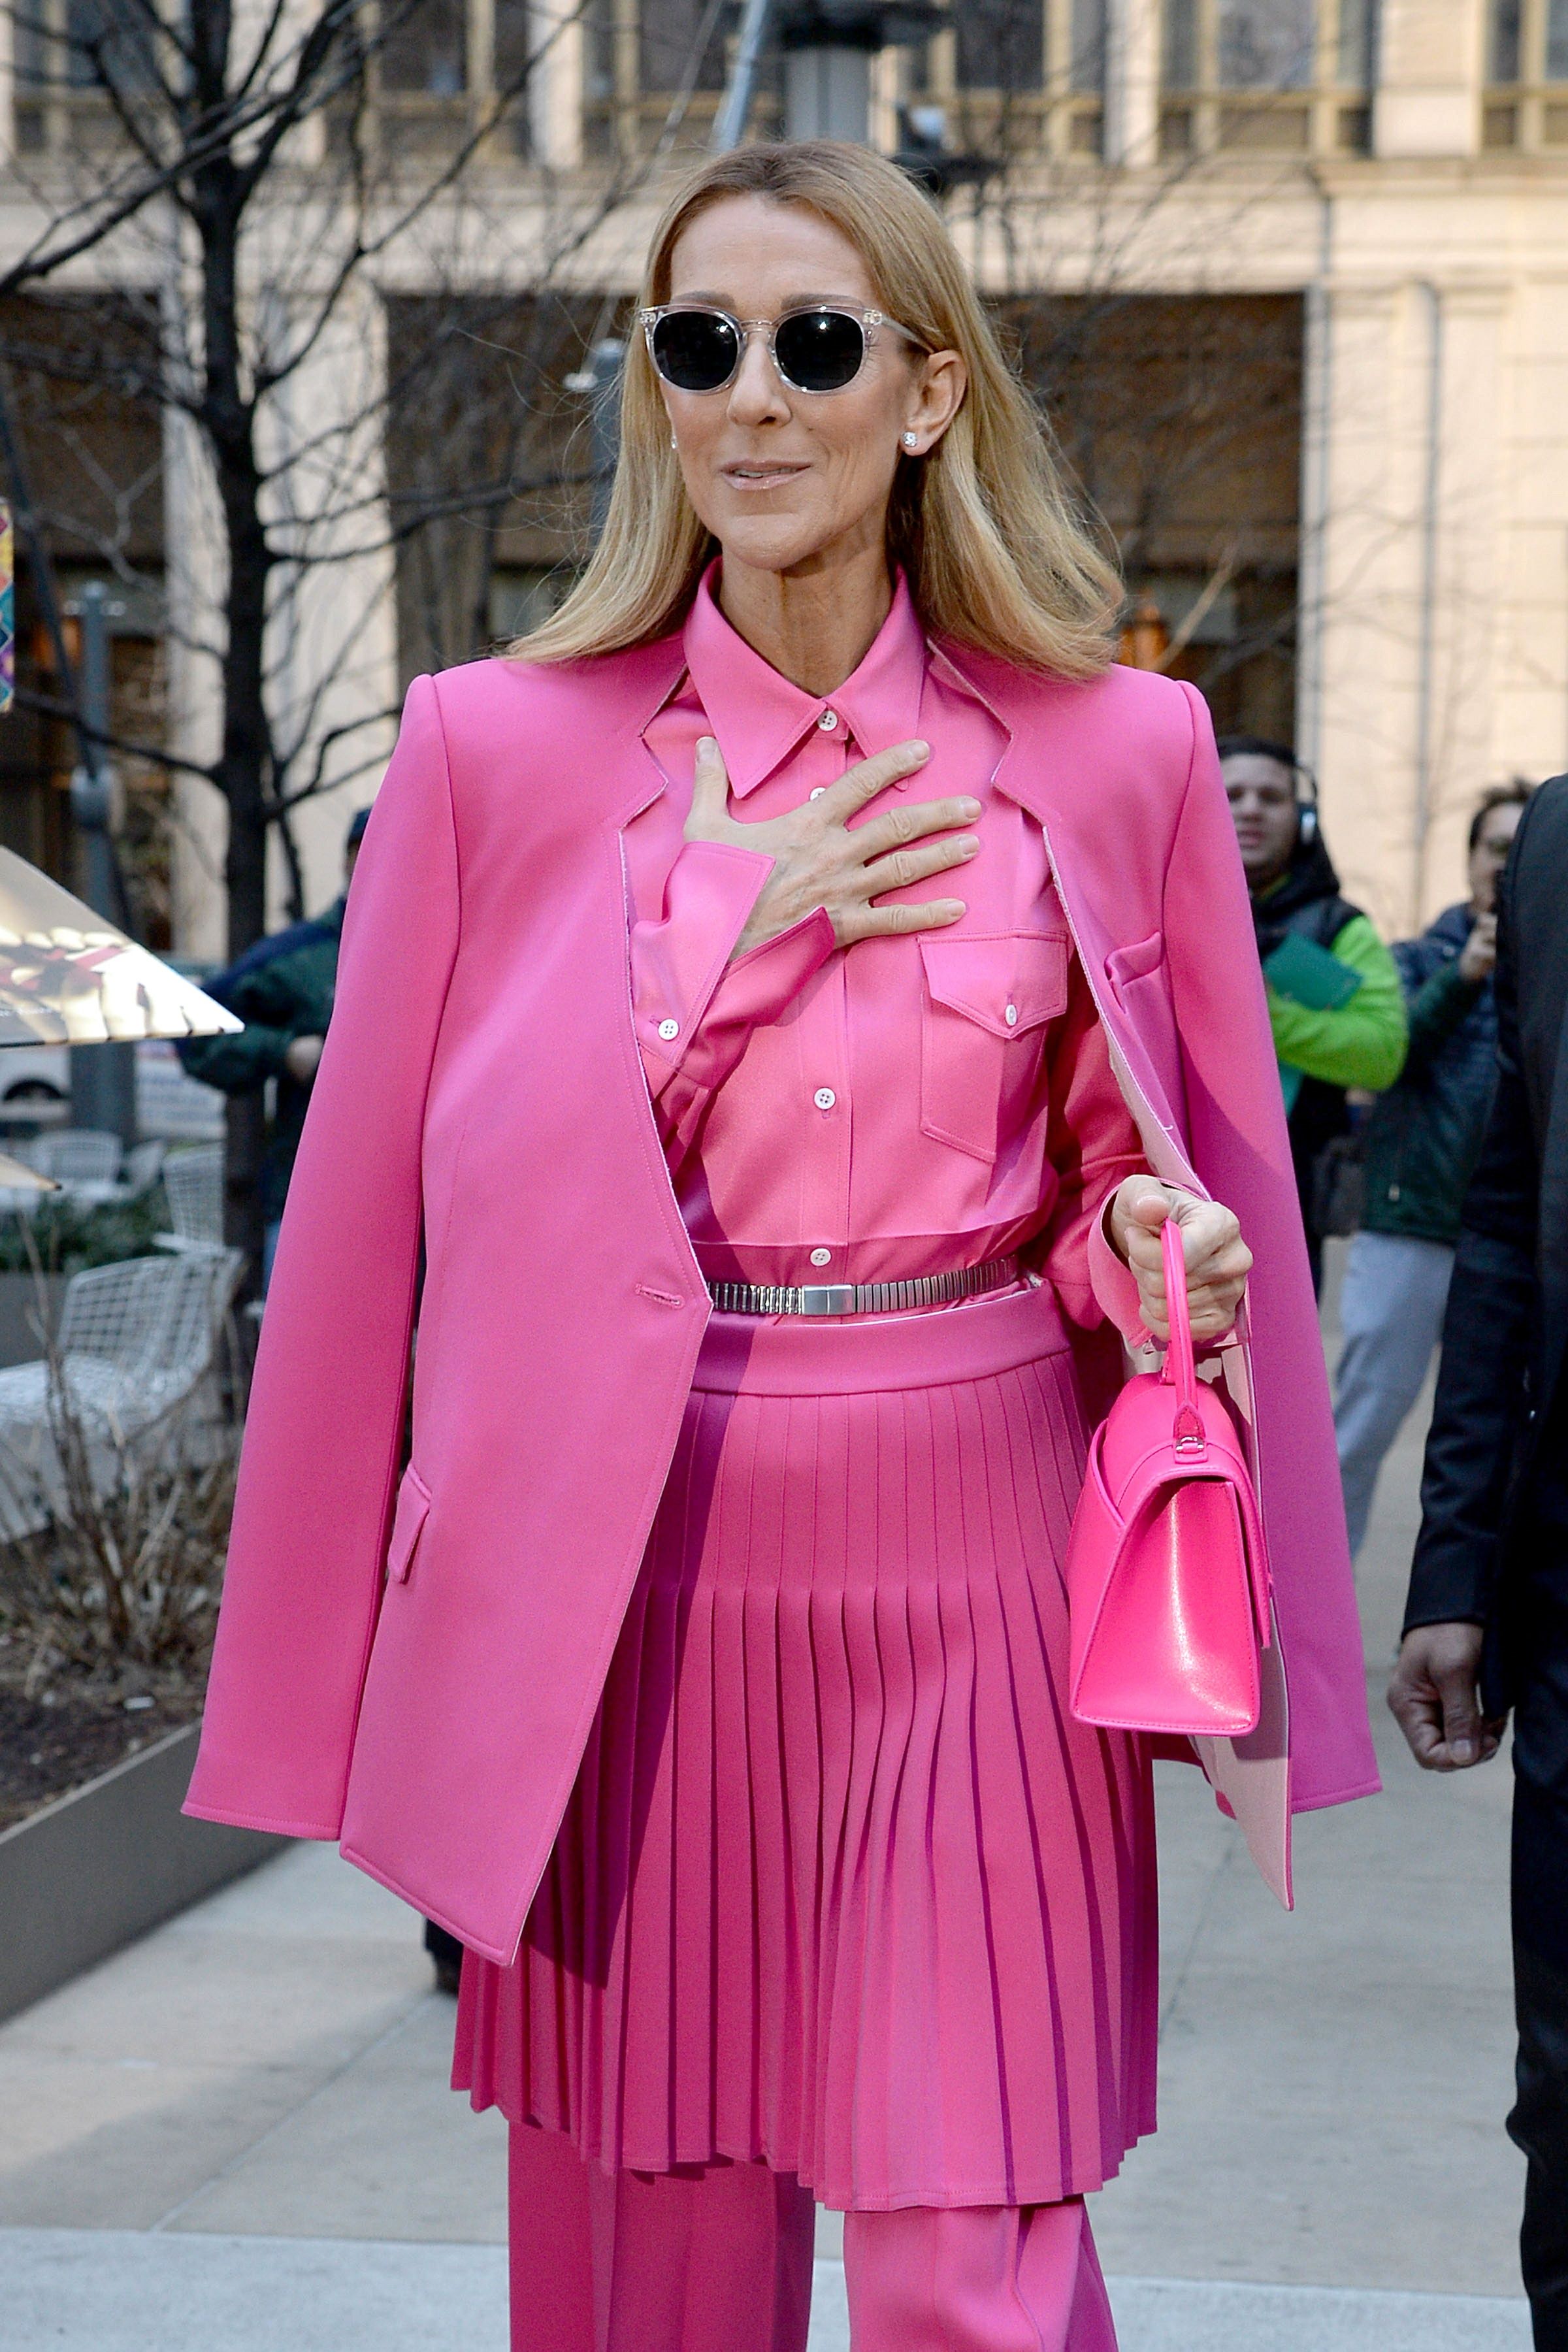 Celine Dion in pink outfit leaving hotel